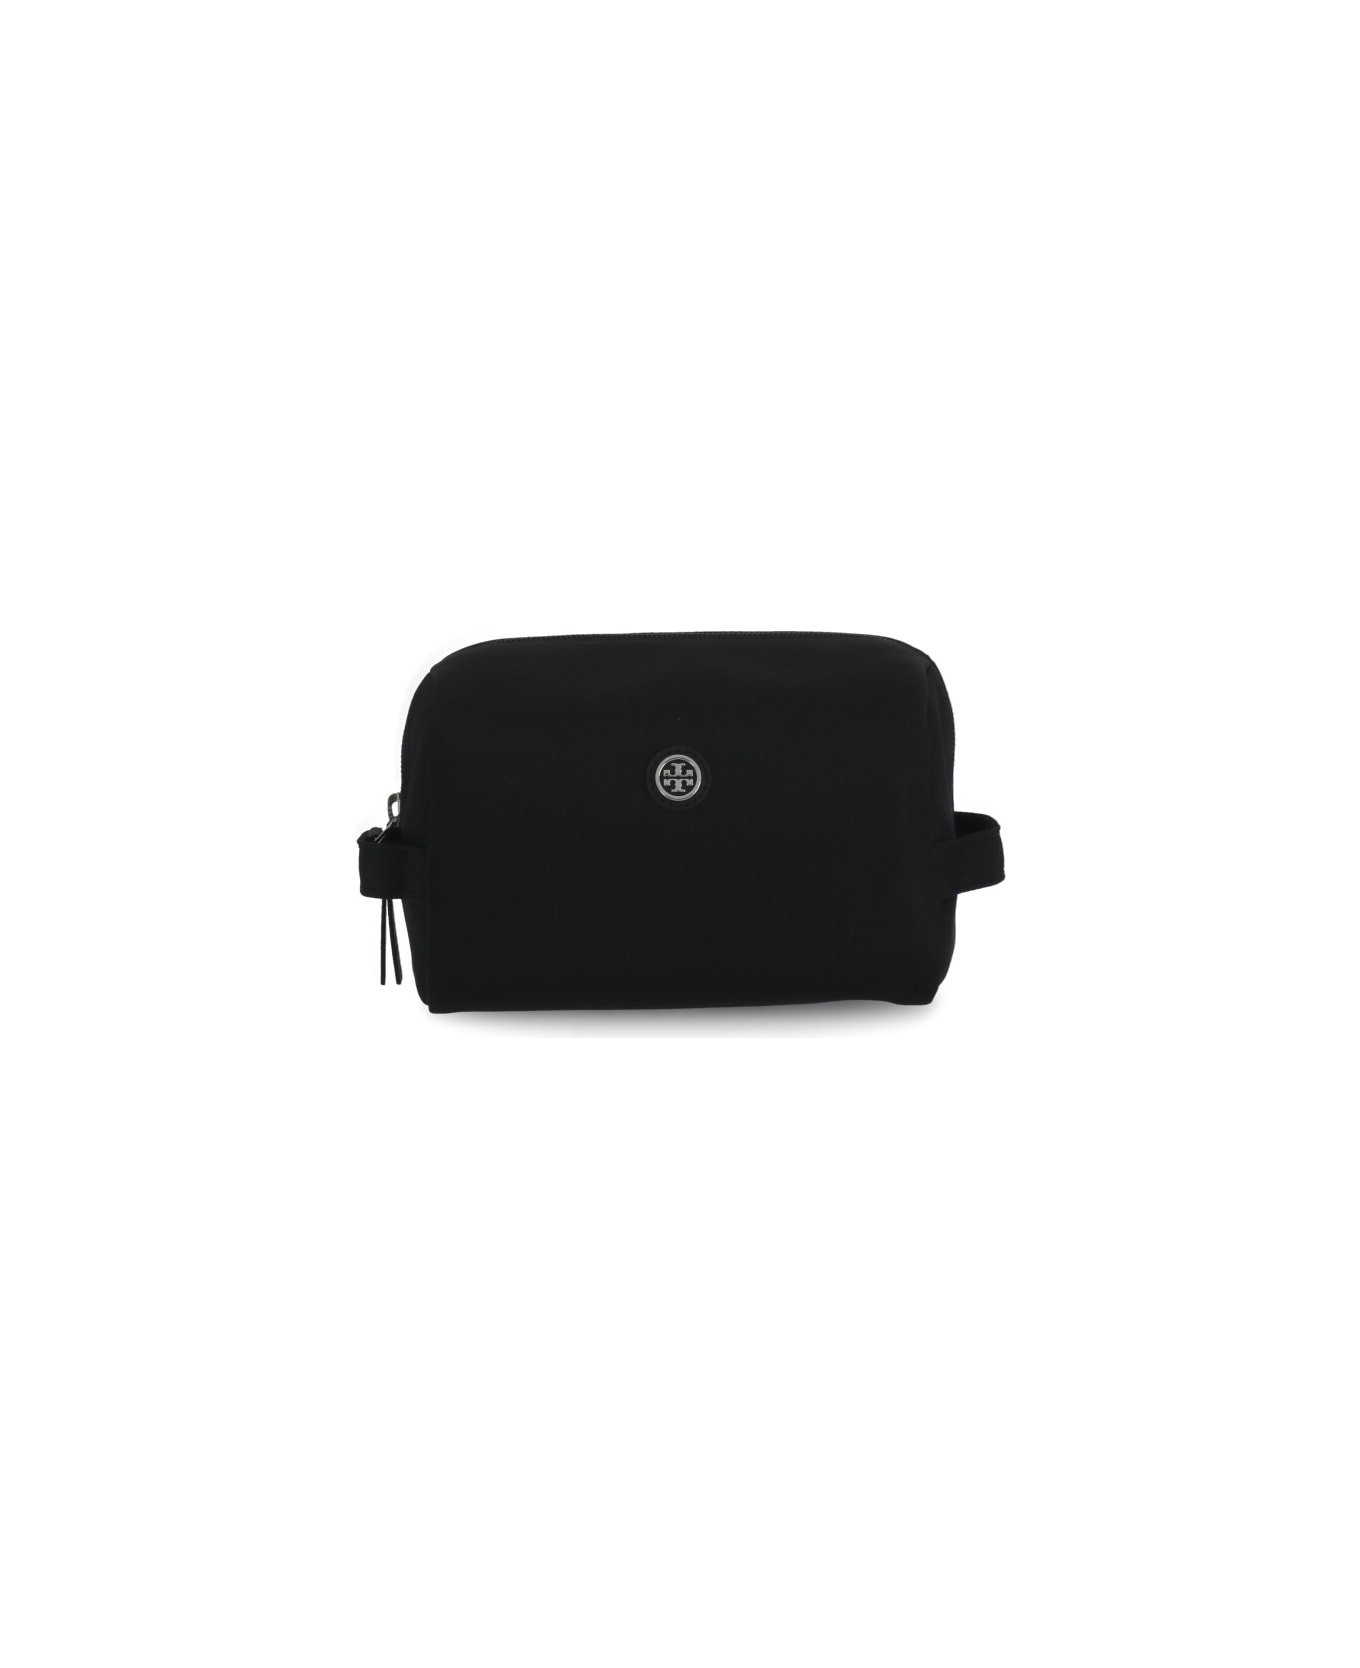 Tory Burch Logo Plaque Large Cosmetic Bag - Black クラッチバッグ